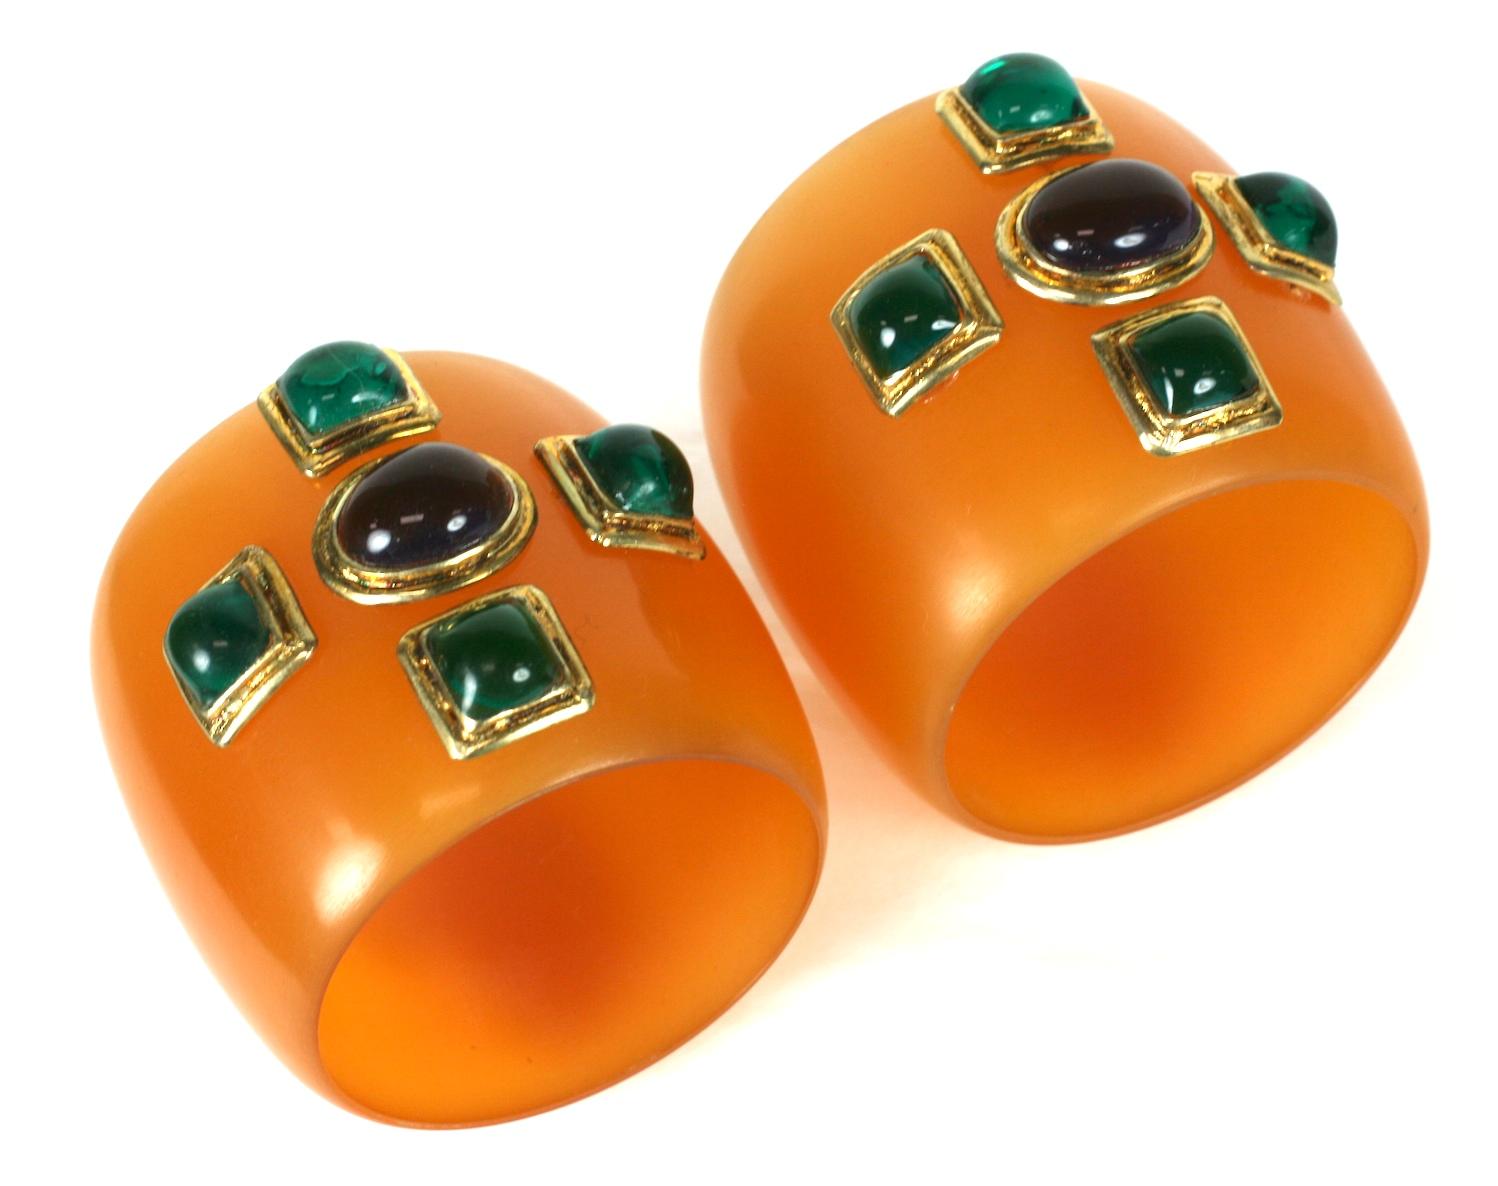 Chanel Massive Bakelite Jeweled Bangles, Maison Gripoix In Excellent Condition For Sale In New York, NY